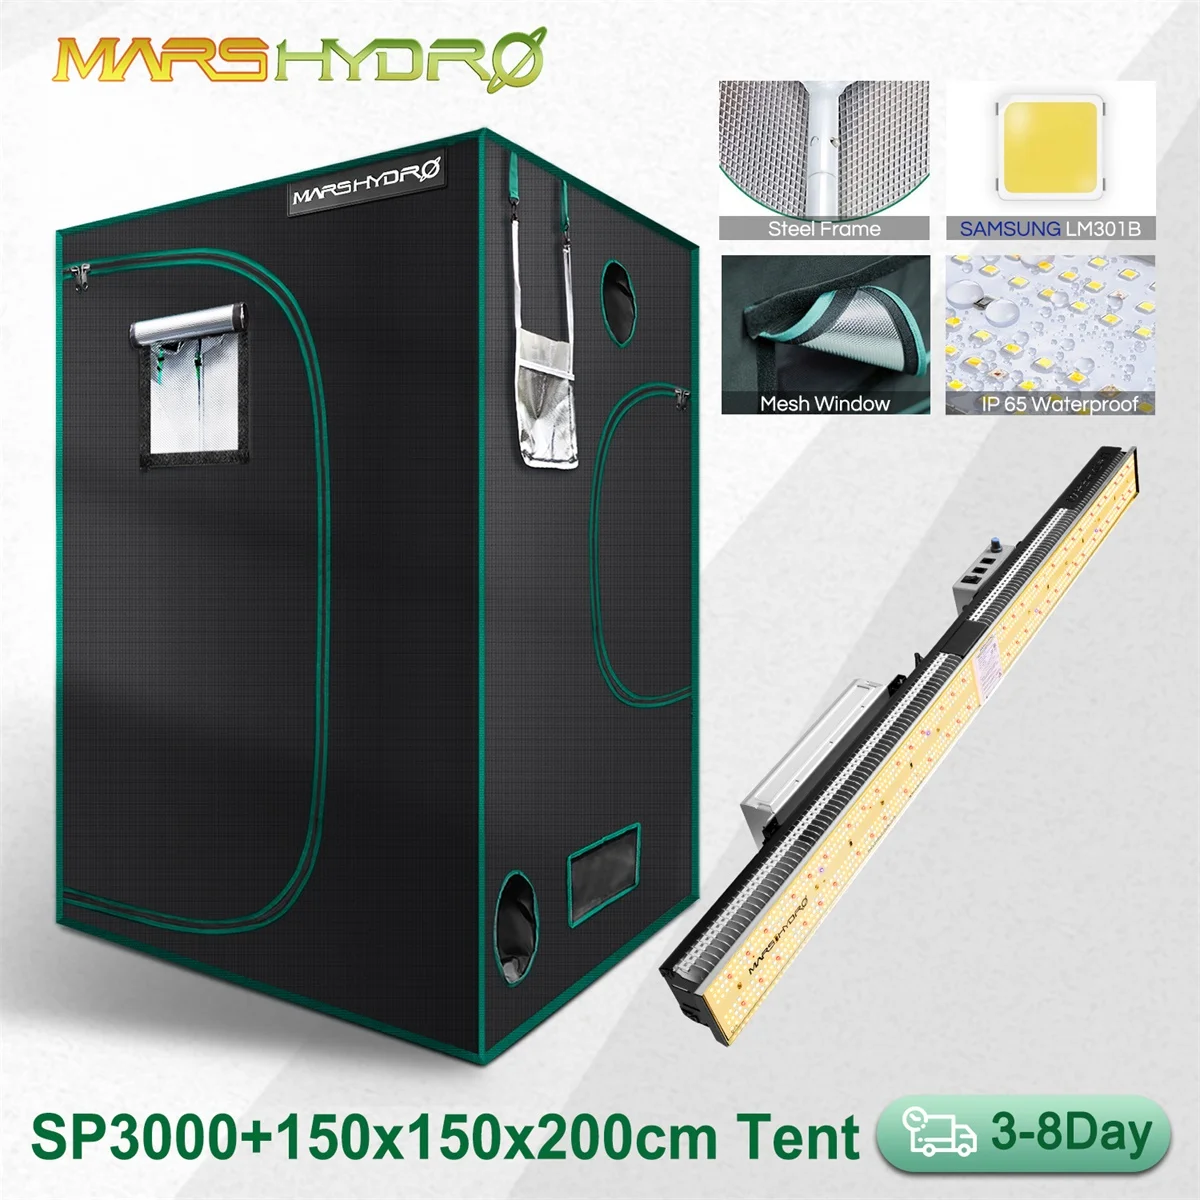 

Mars Hydro SP 3000 LED Grow Light And 150x150cm Grow Tent for Indoor Plants Veg Flower Replace HPS/HID Hydroponics Full Spectrum